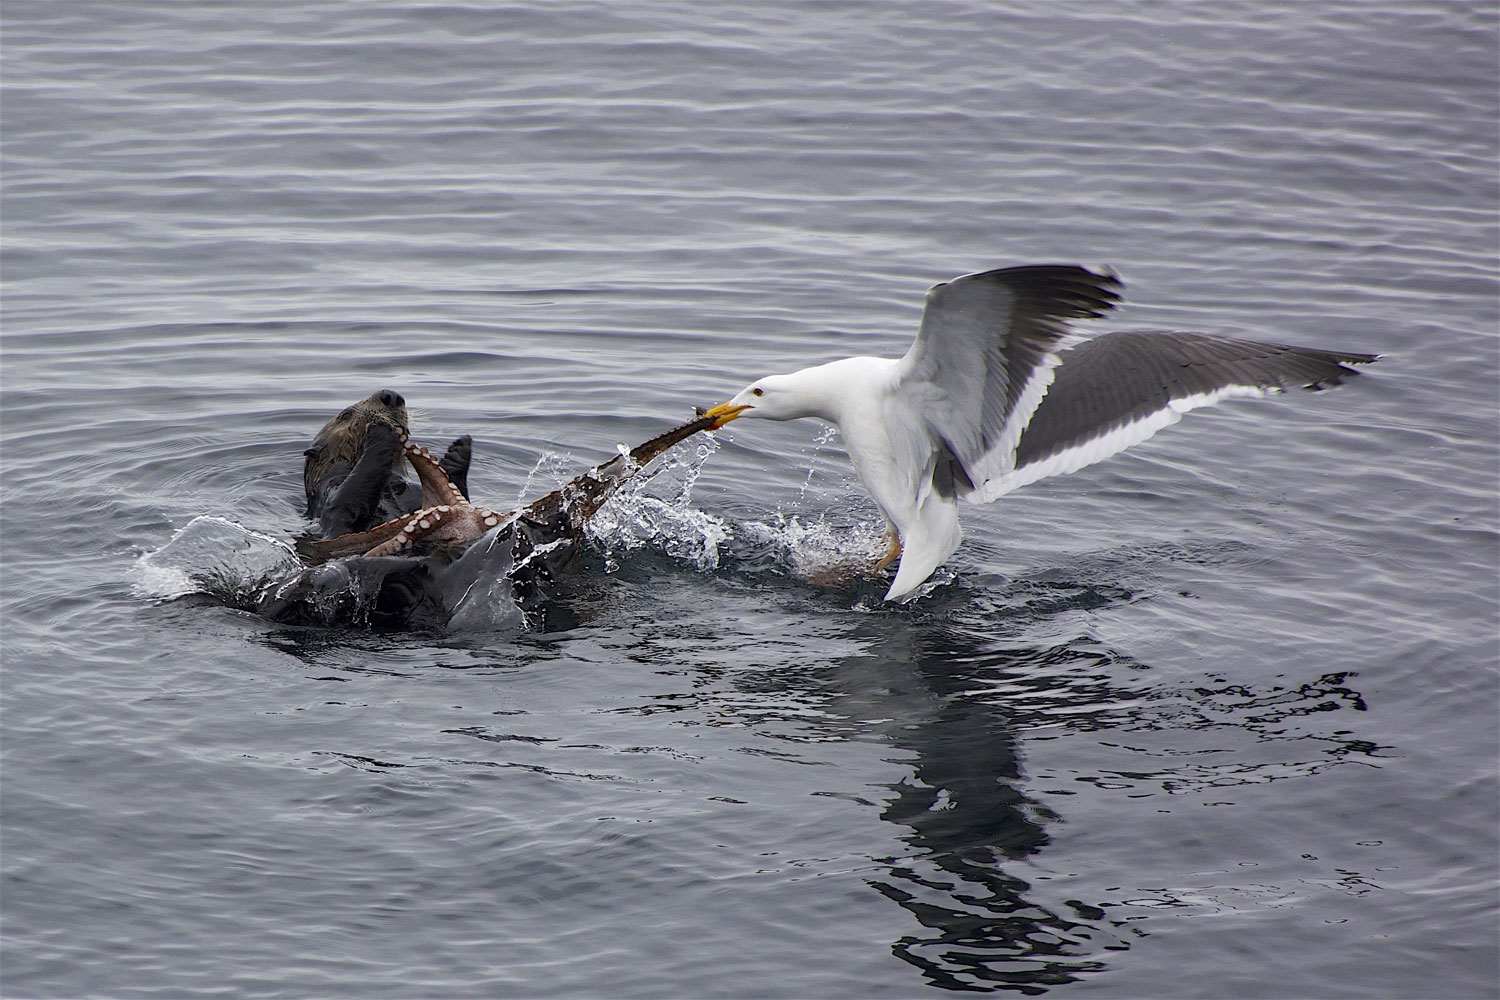 An otter caught an octopus and was enjoying its meal when a gull tried to share and didn't succeed.